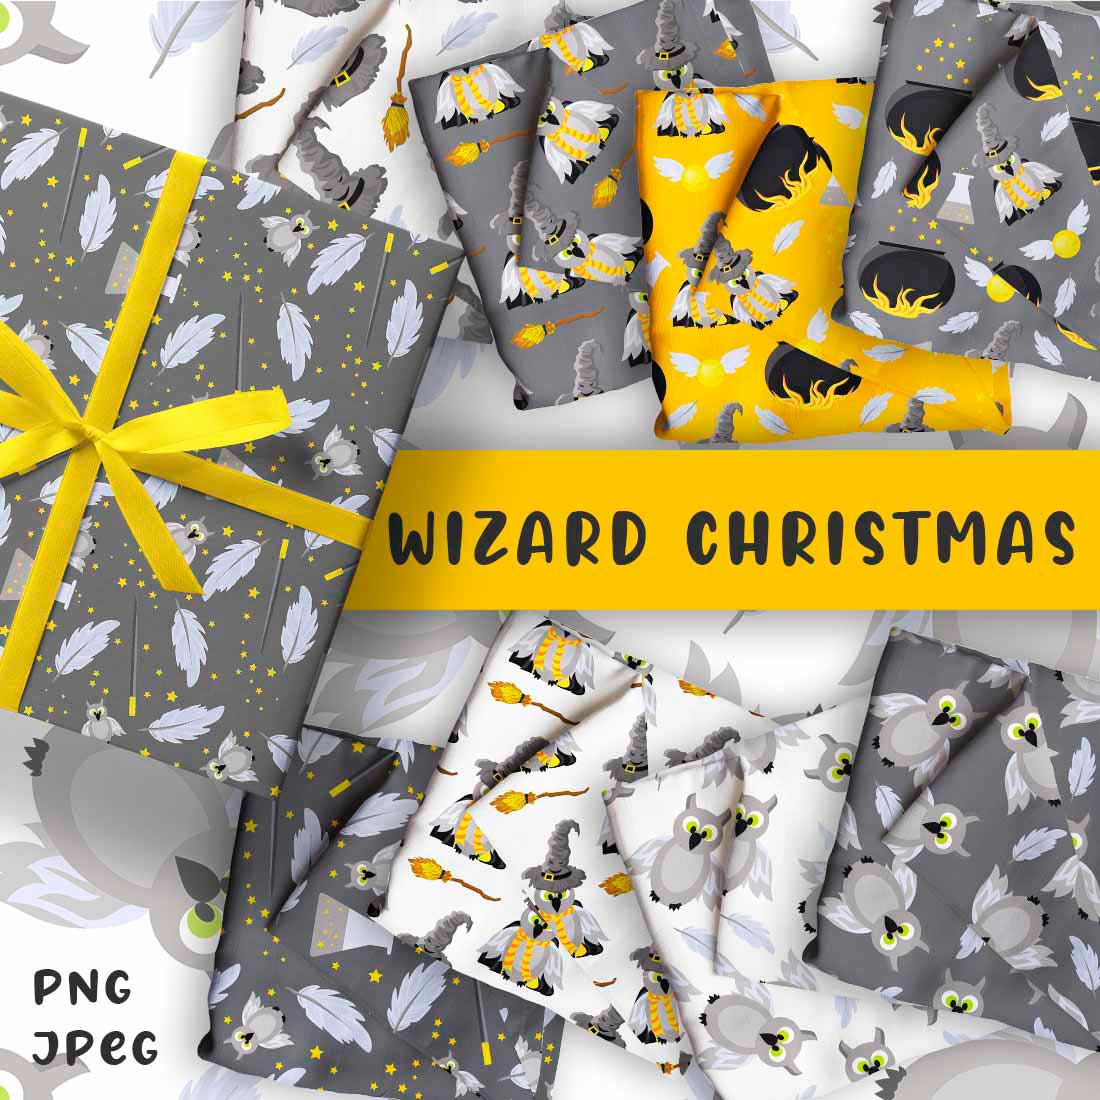 Pack of images of enchanting magic patterns.